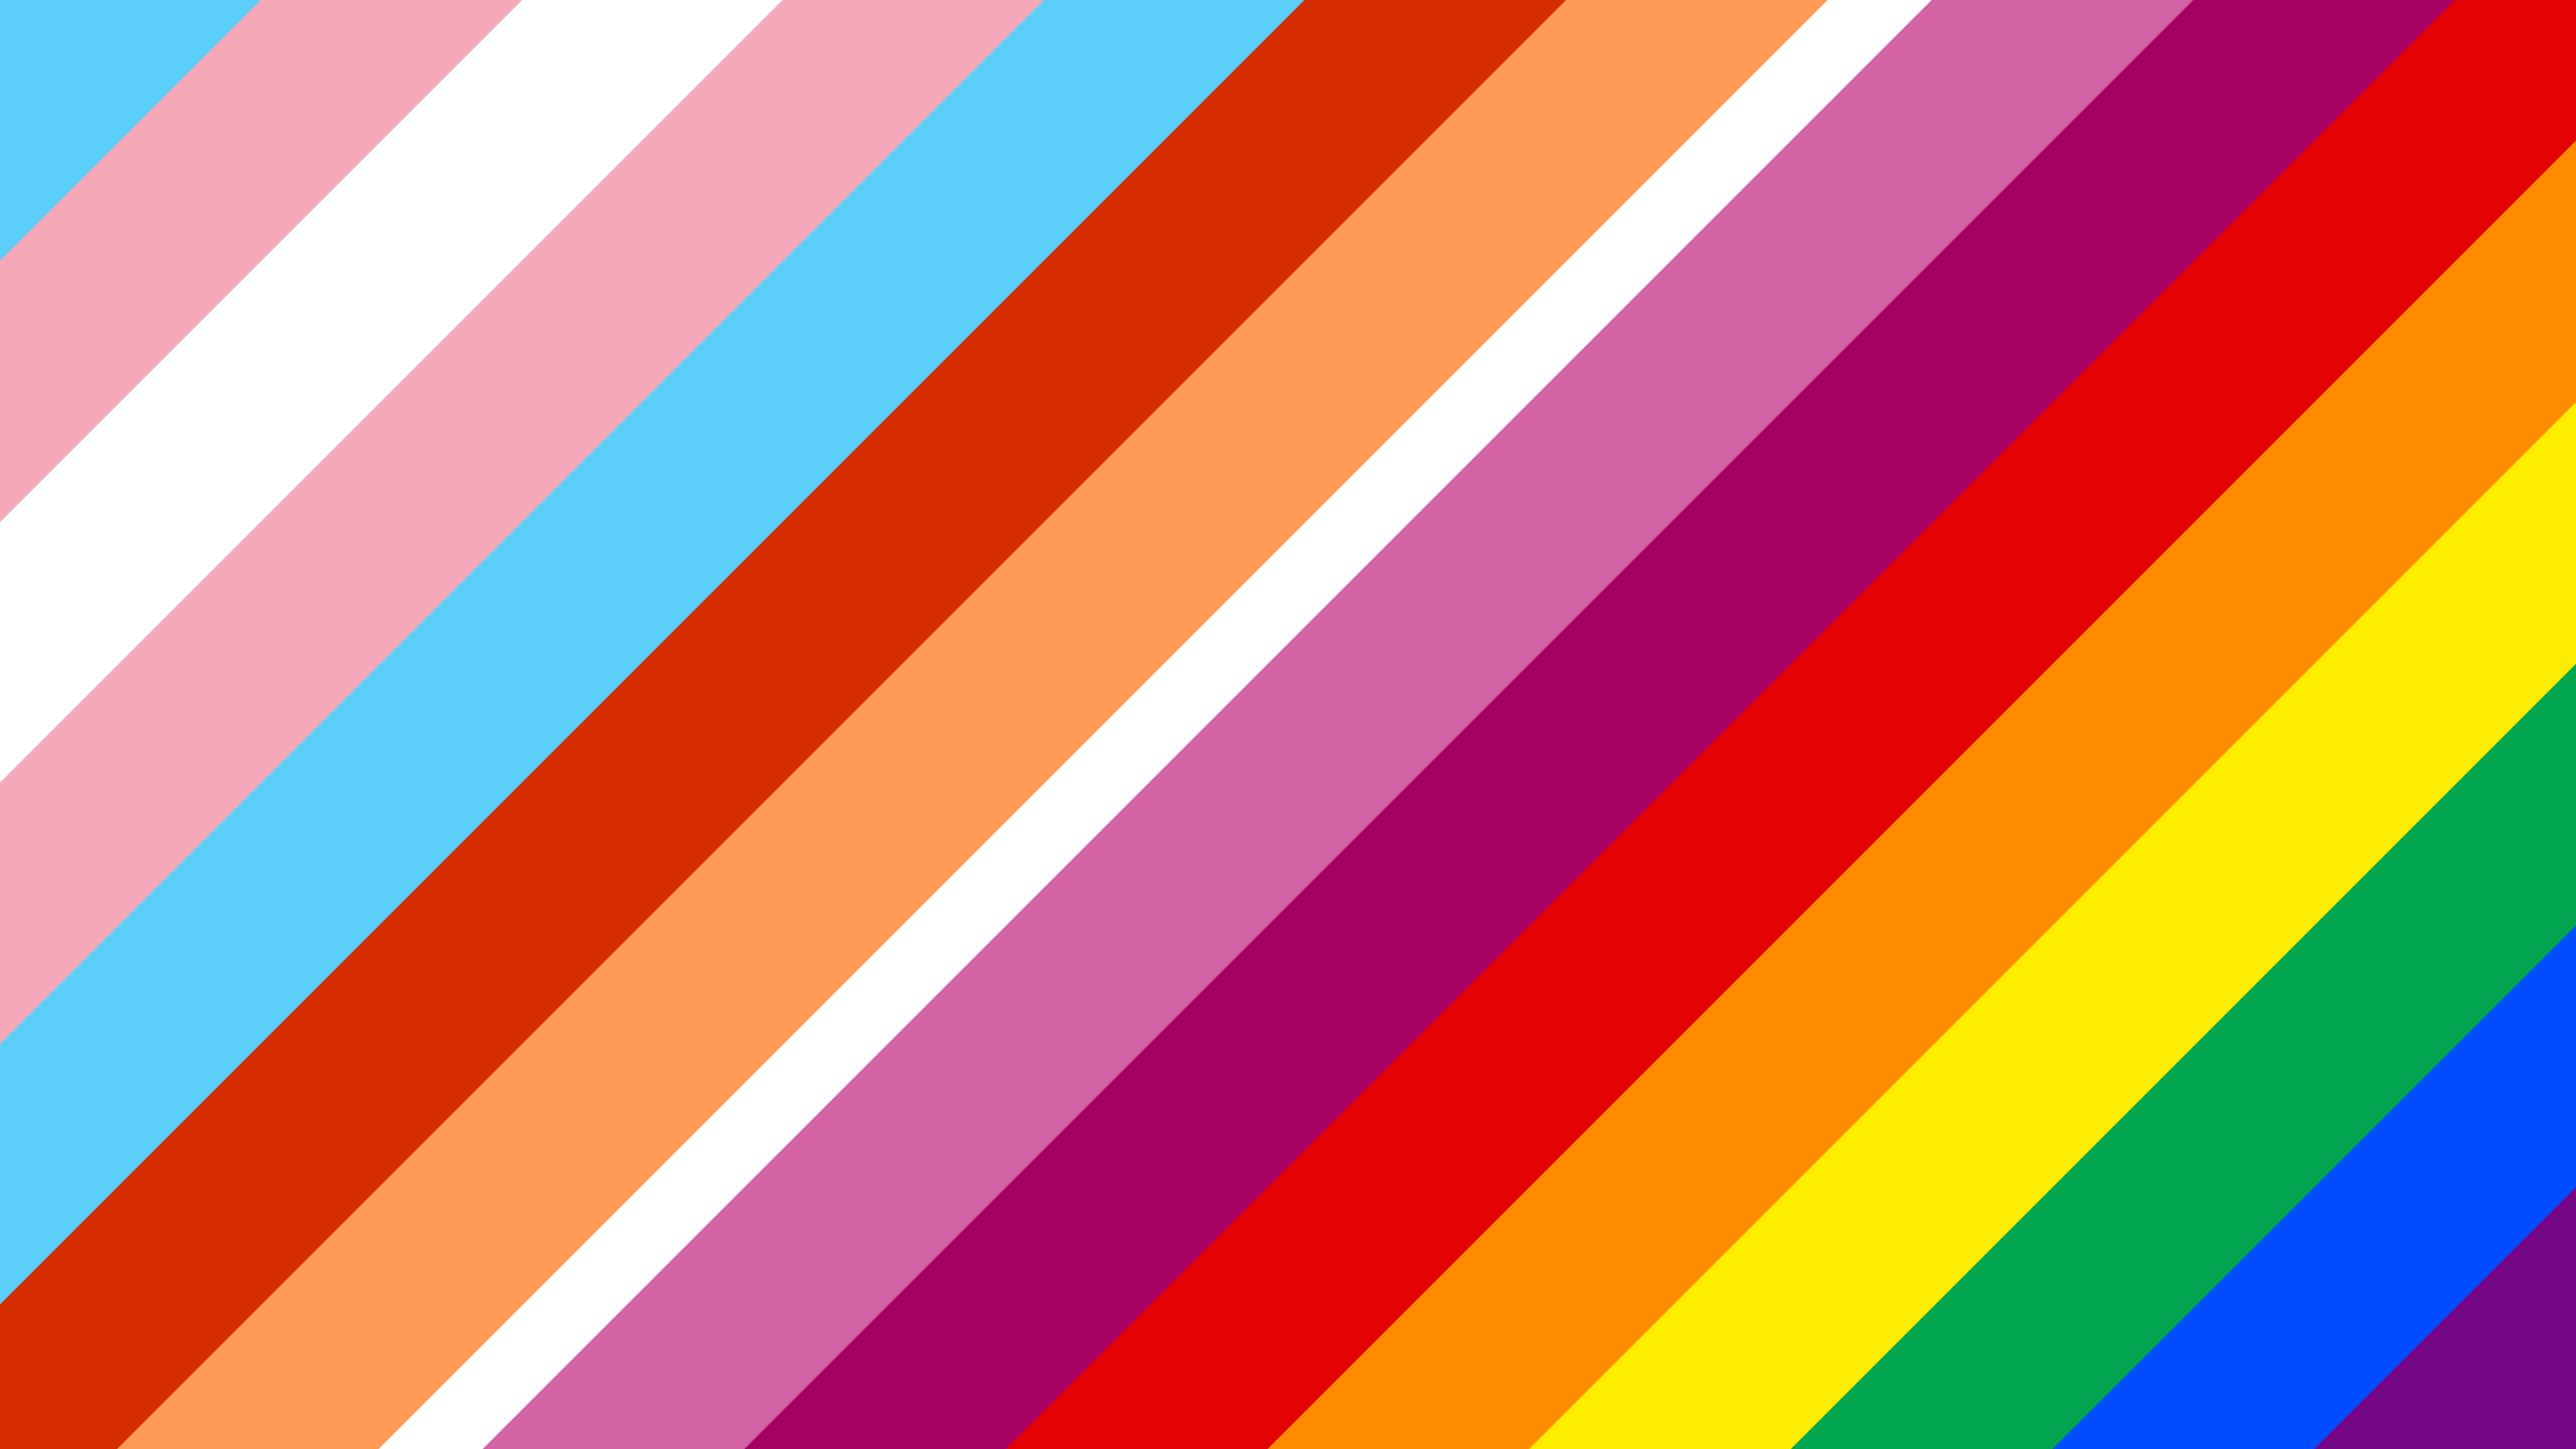 I made a 4k wallpaper that has the trans, lesbian, and gay pride